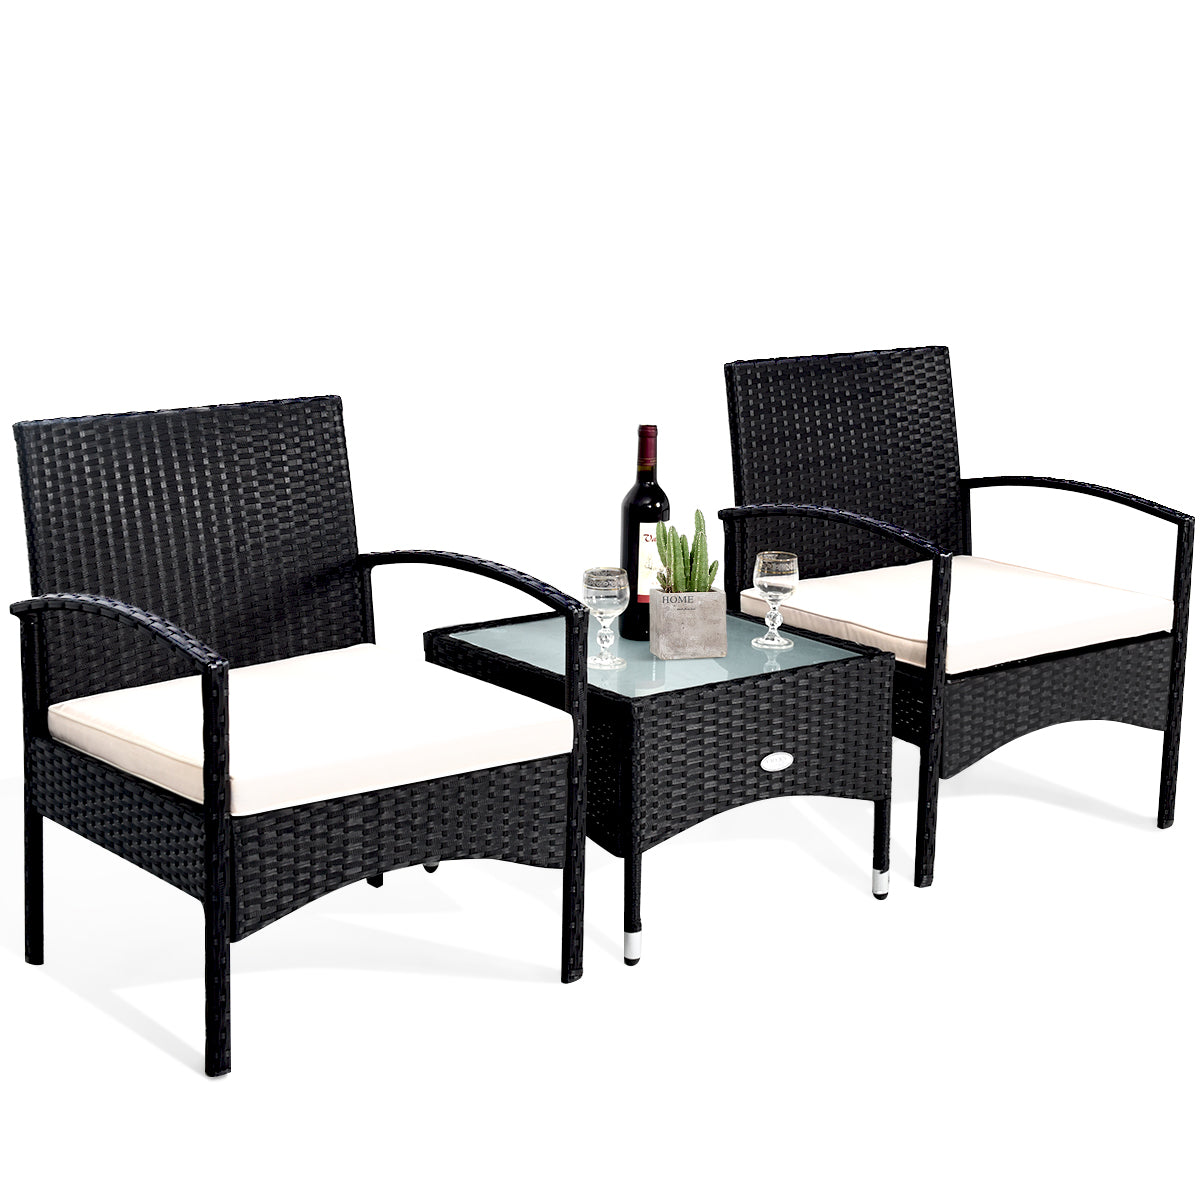 3 Pieces Patio Wicker Rattan Furniture Set with Cushion for Lawn Backyard